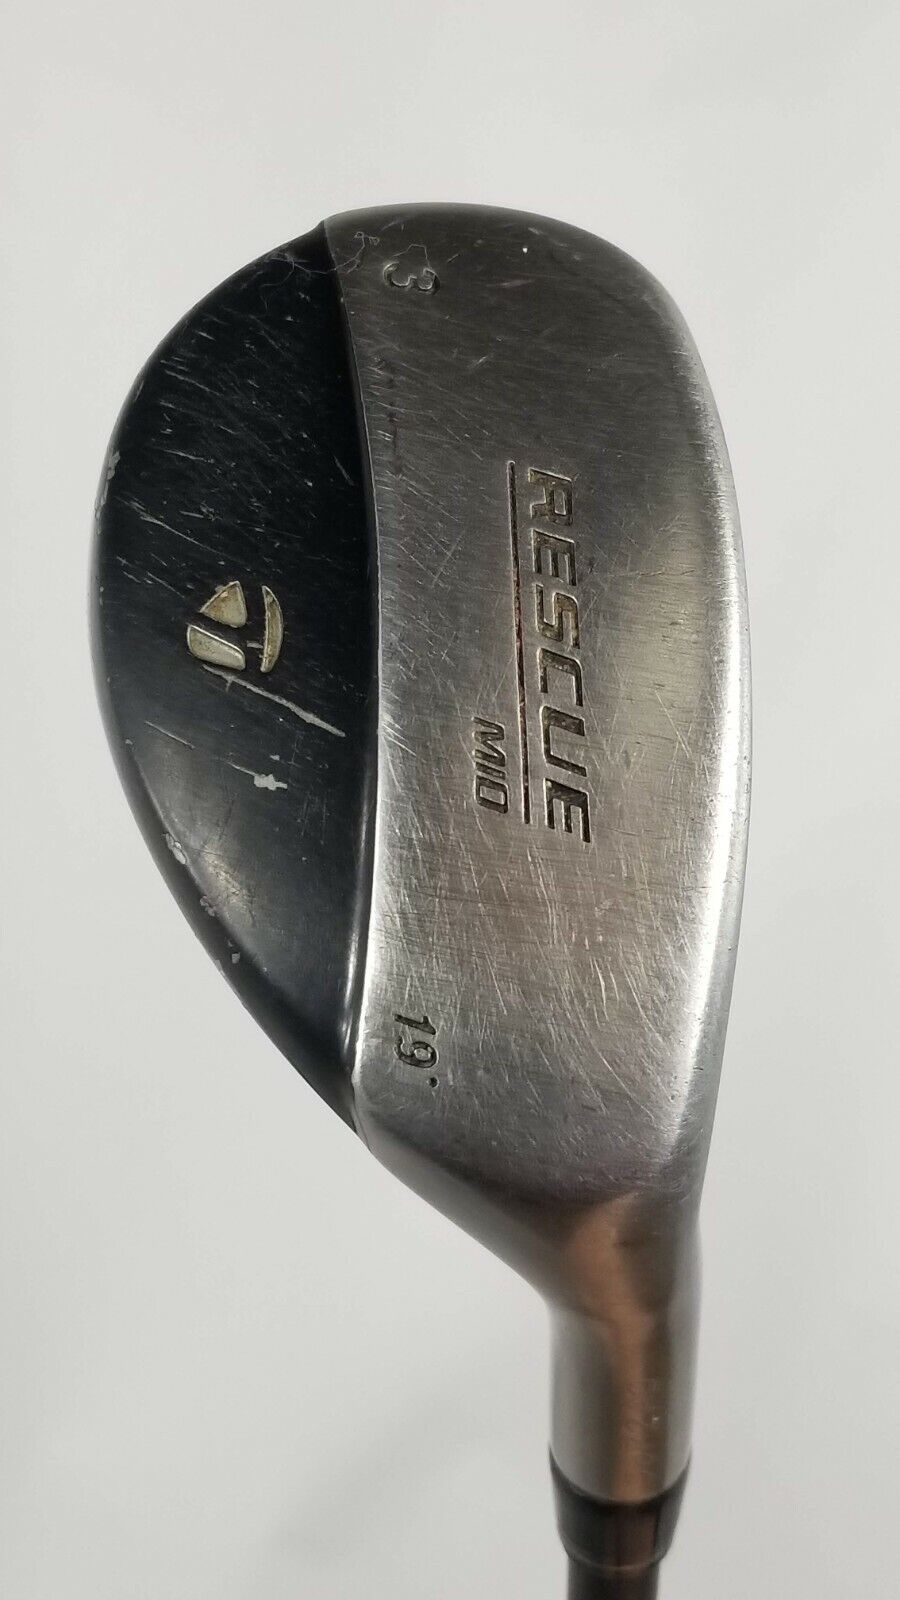 TAYLORMADE RESCUE MID 3-HYBRID 19* REG TAYLORMADE ULTRALITE 40" FAIR